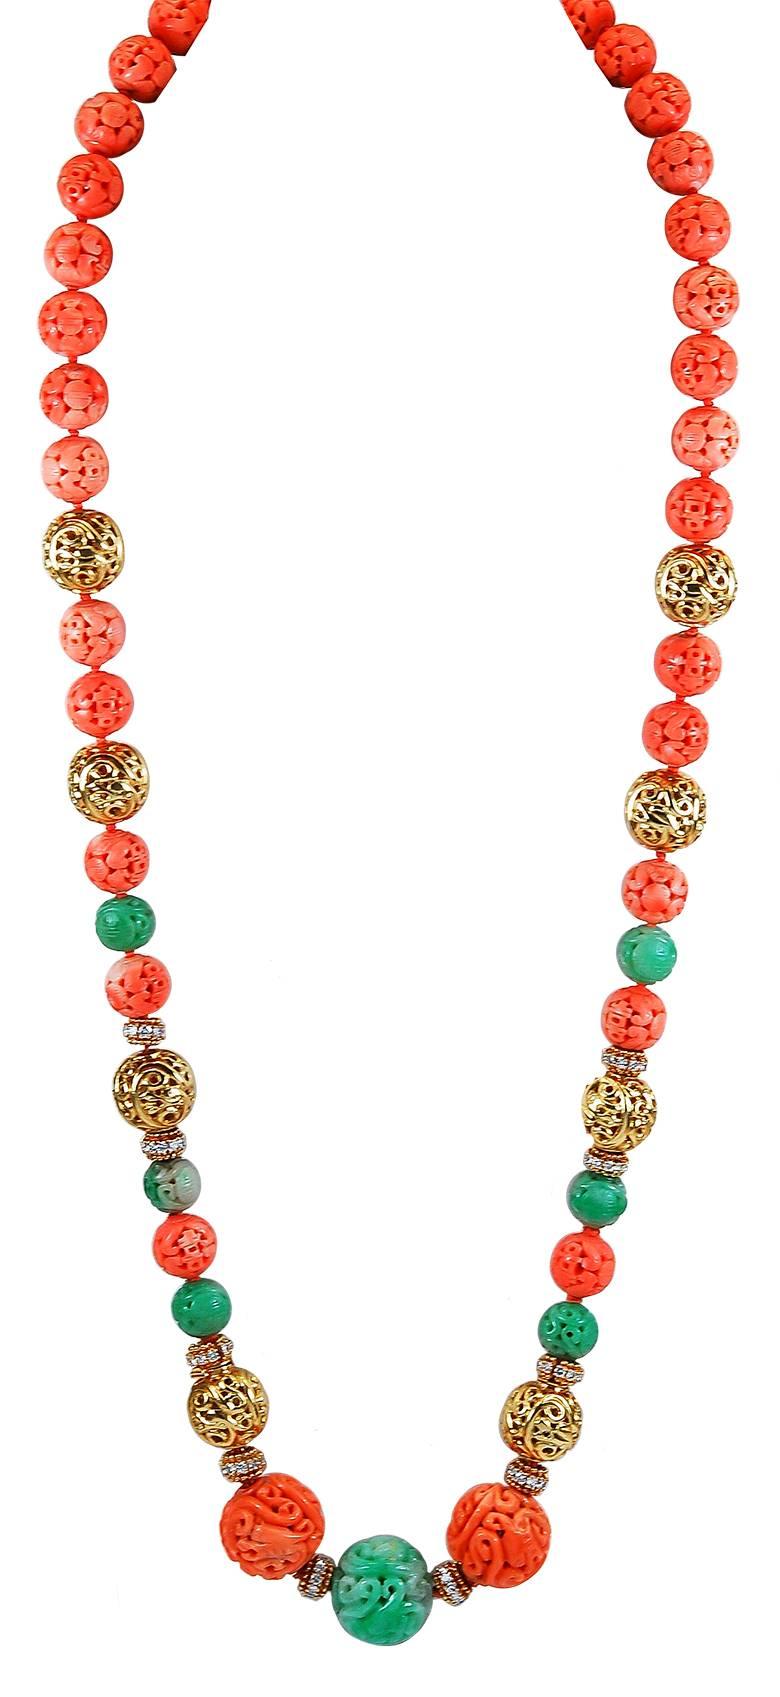 A vibrant piece centering 2 carved coral beads approx. 22.0 mm., and one carved jade bead approx. 23.0 mm., completed by 33 surrounding carved coral beads approximately 13.6 to 12.6 mm. and 6 carved jade beads approx. 12.8 mm., the carvings of